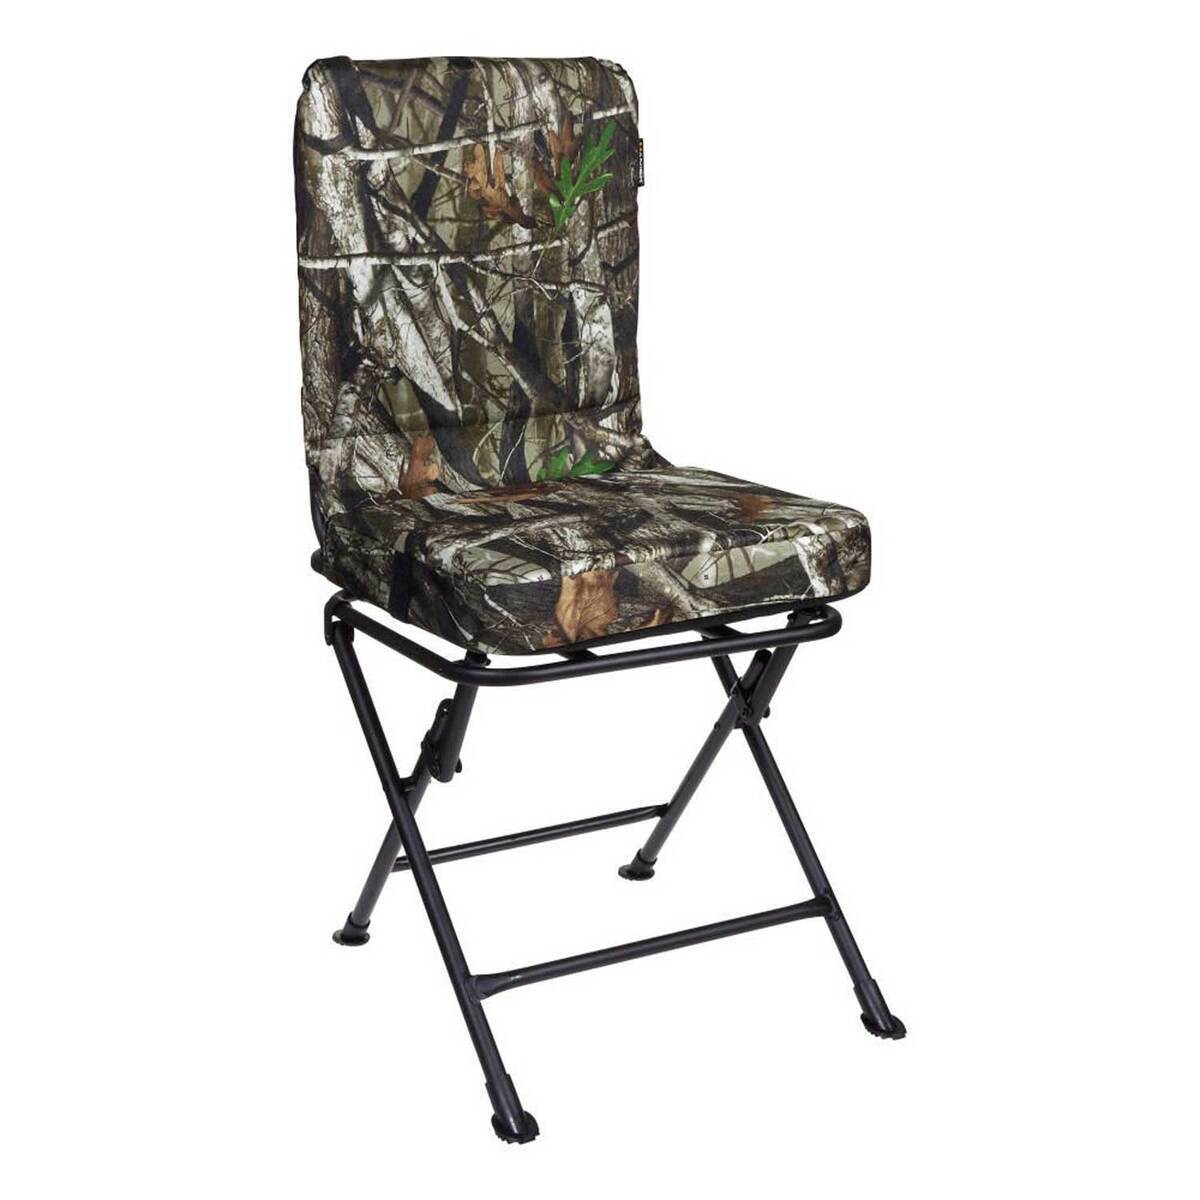 Hunters Specialties Bunsaver - Self-Inflatable and Waterproof Cushion